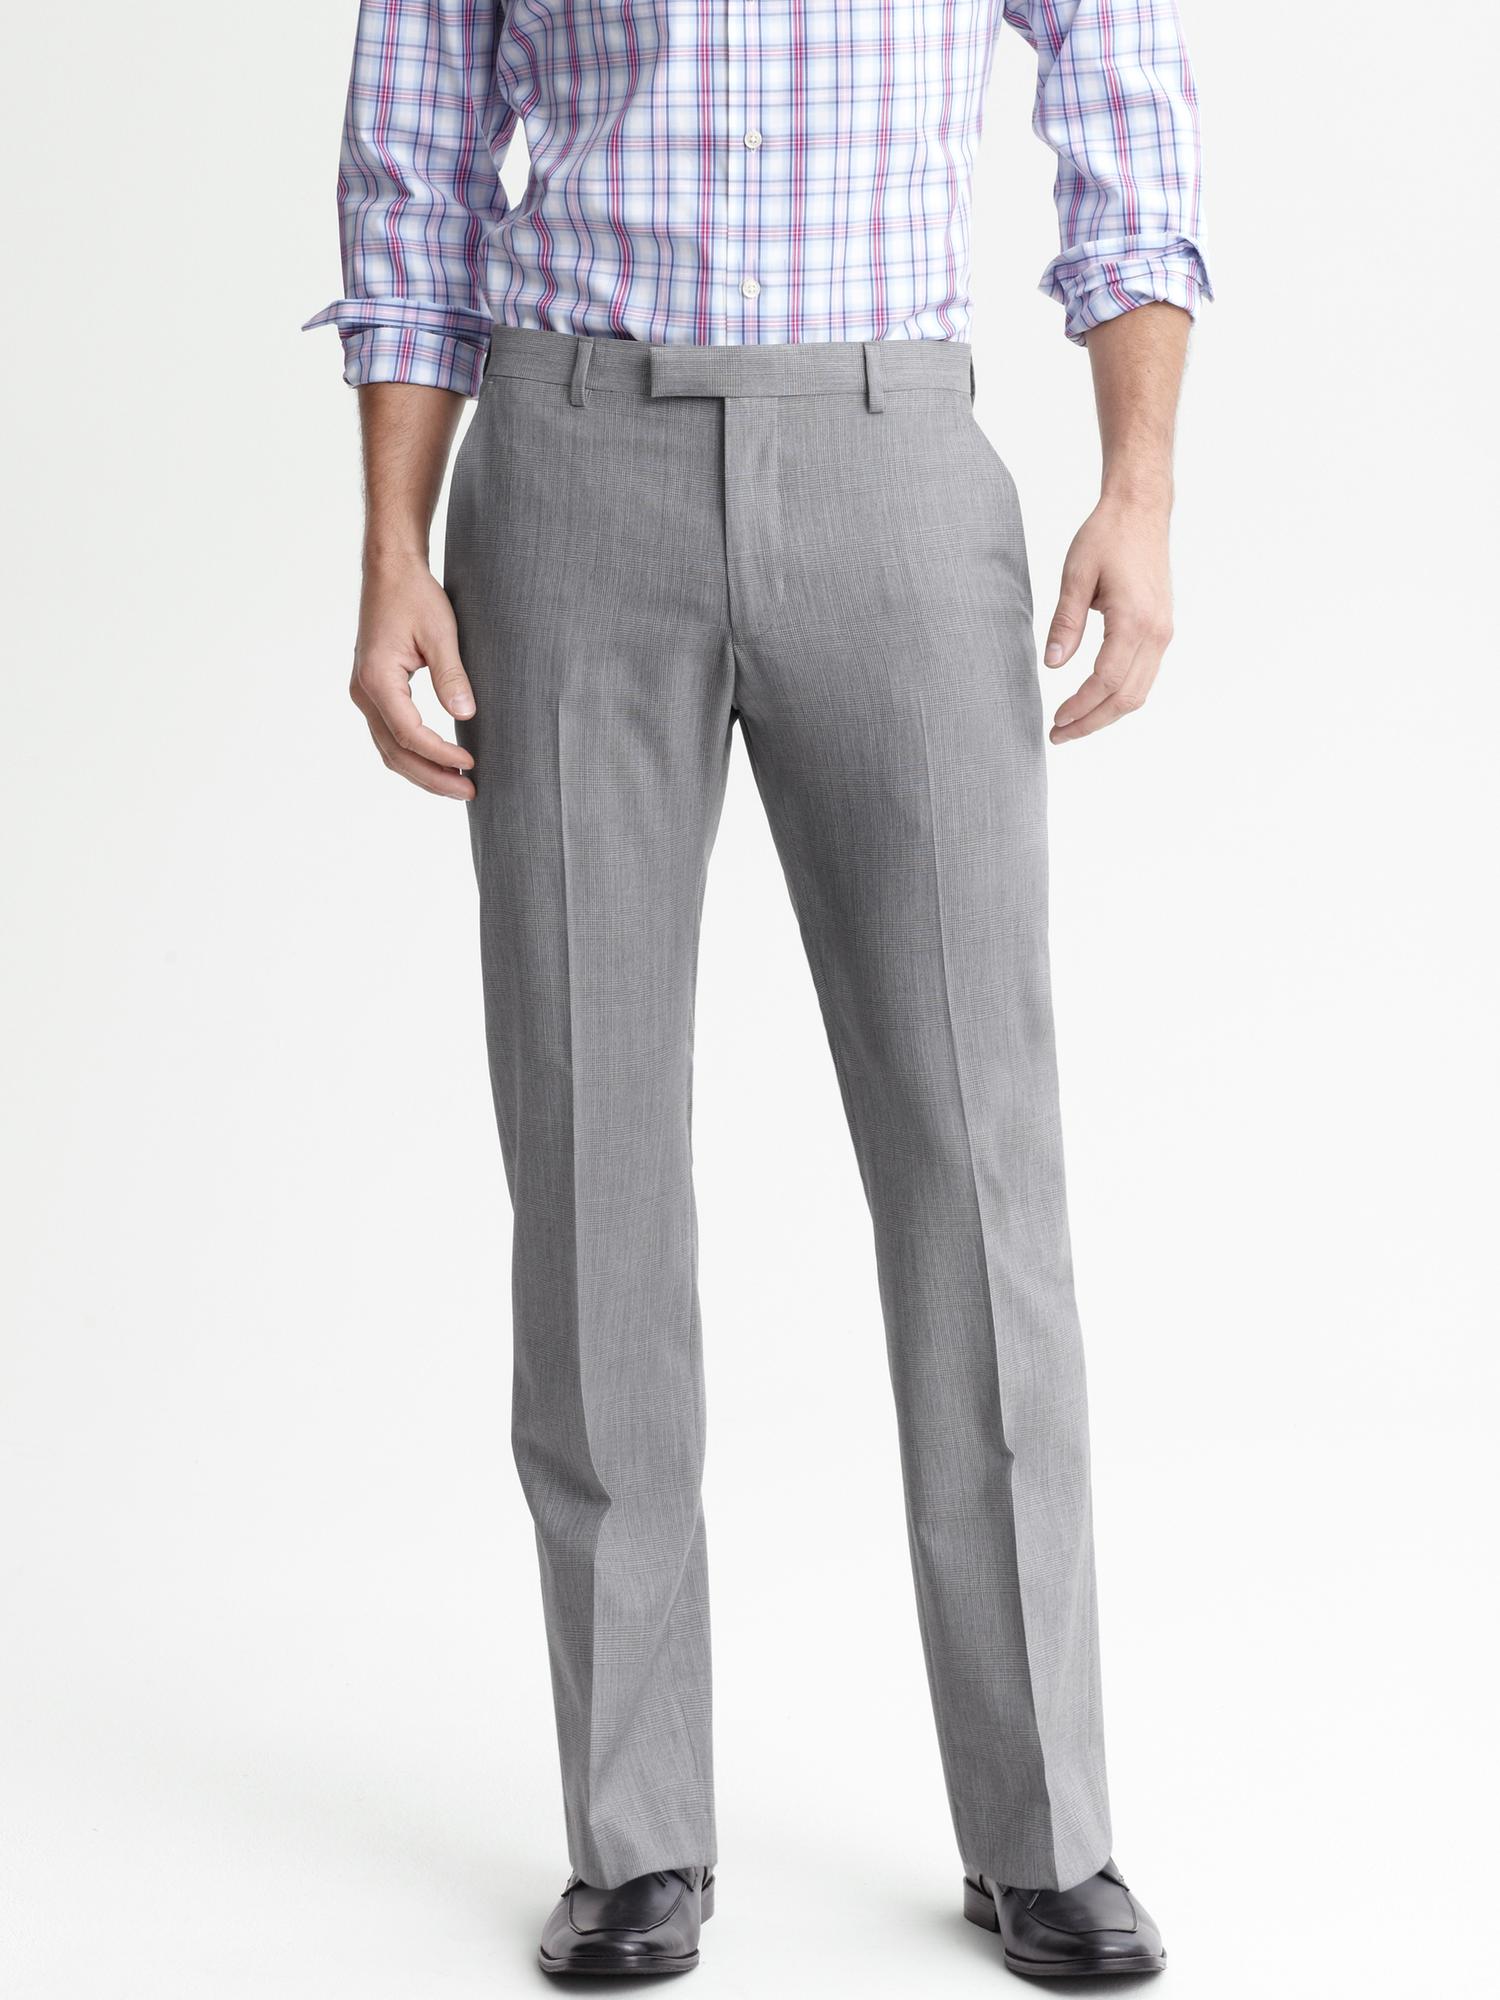 Tailored Slim-Fit Heather Grey Plaid Wool Suit Trouser